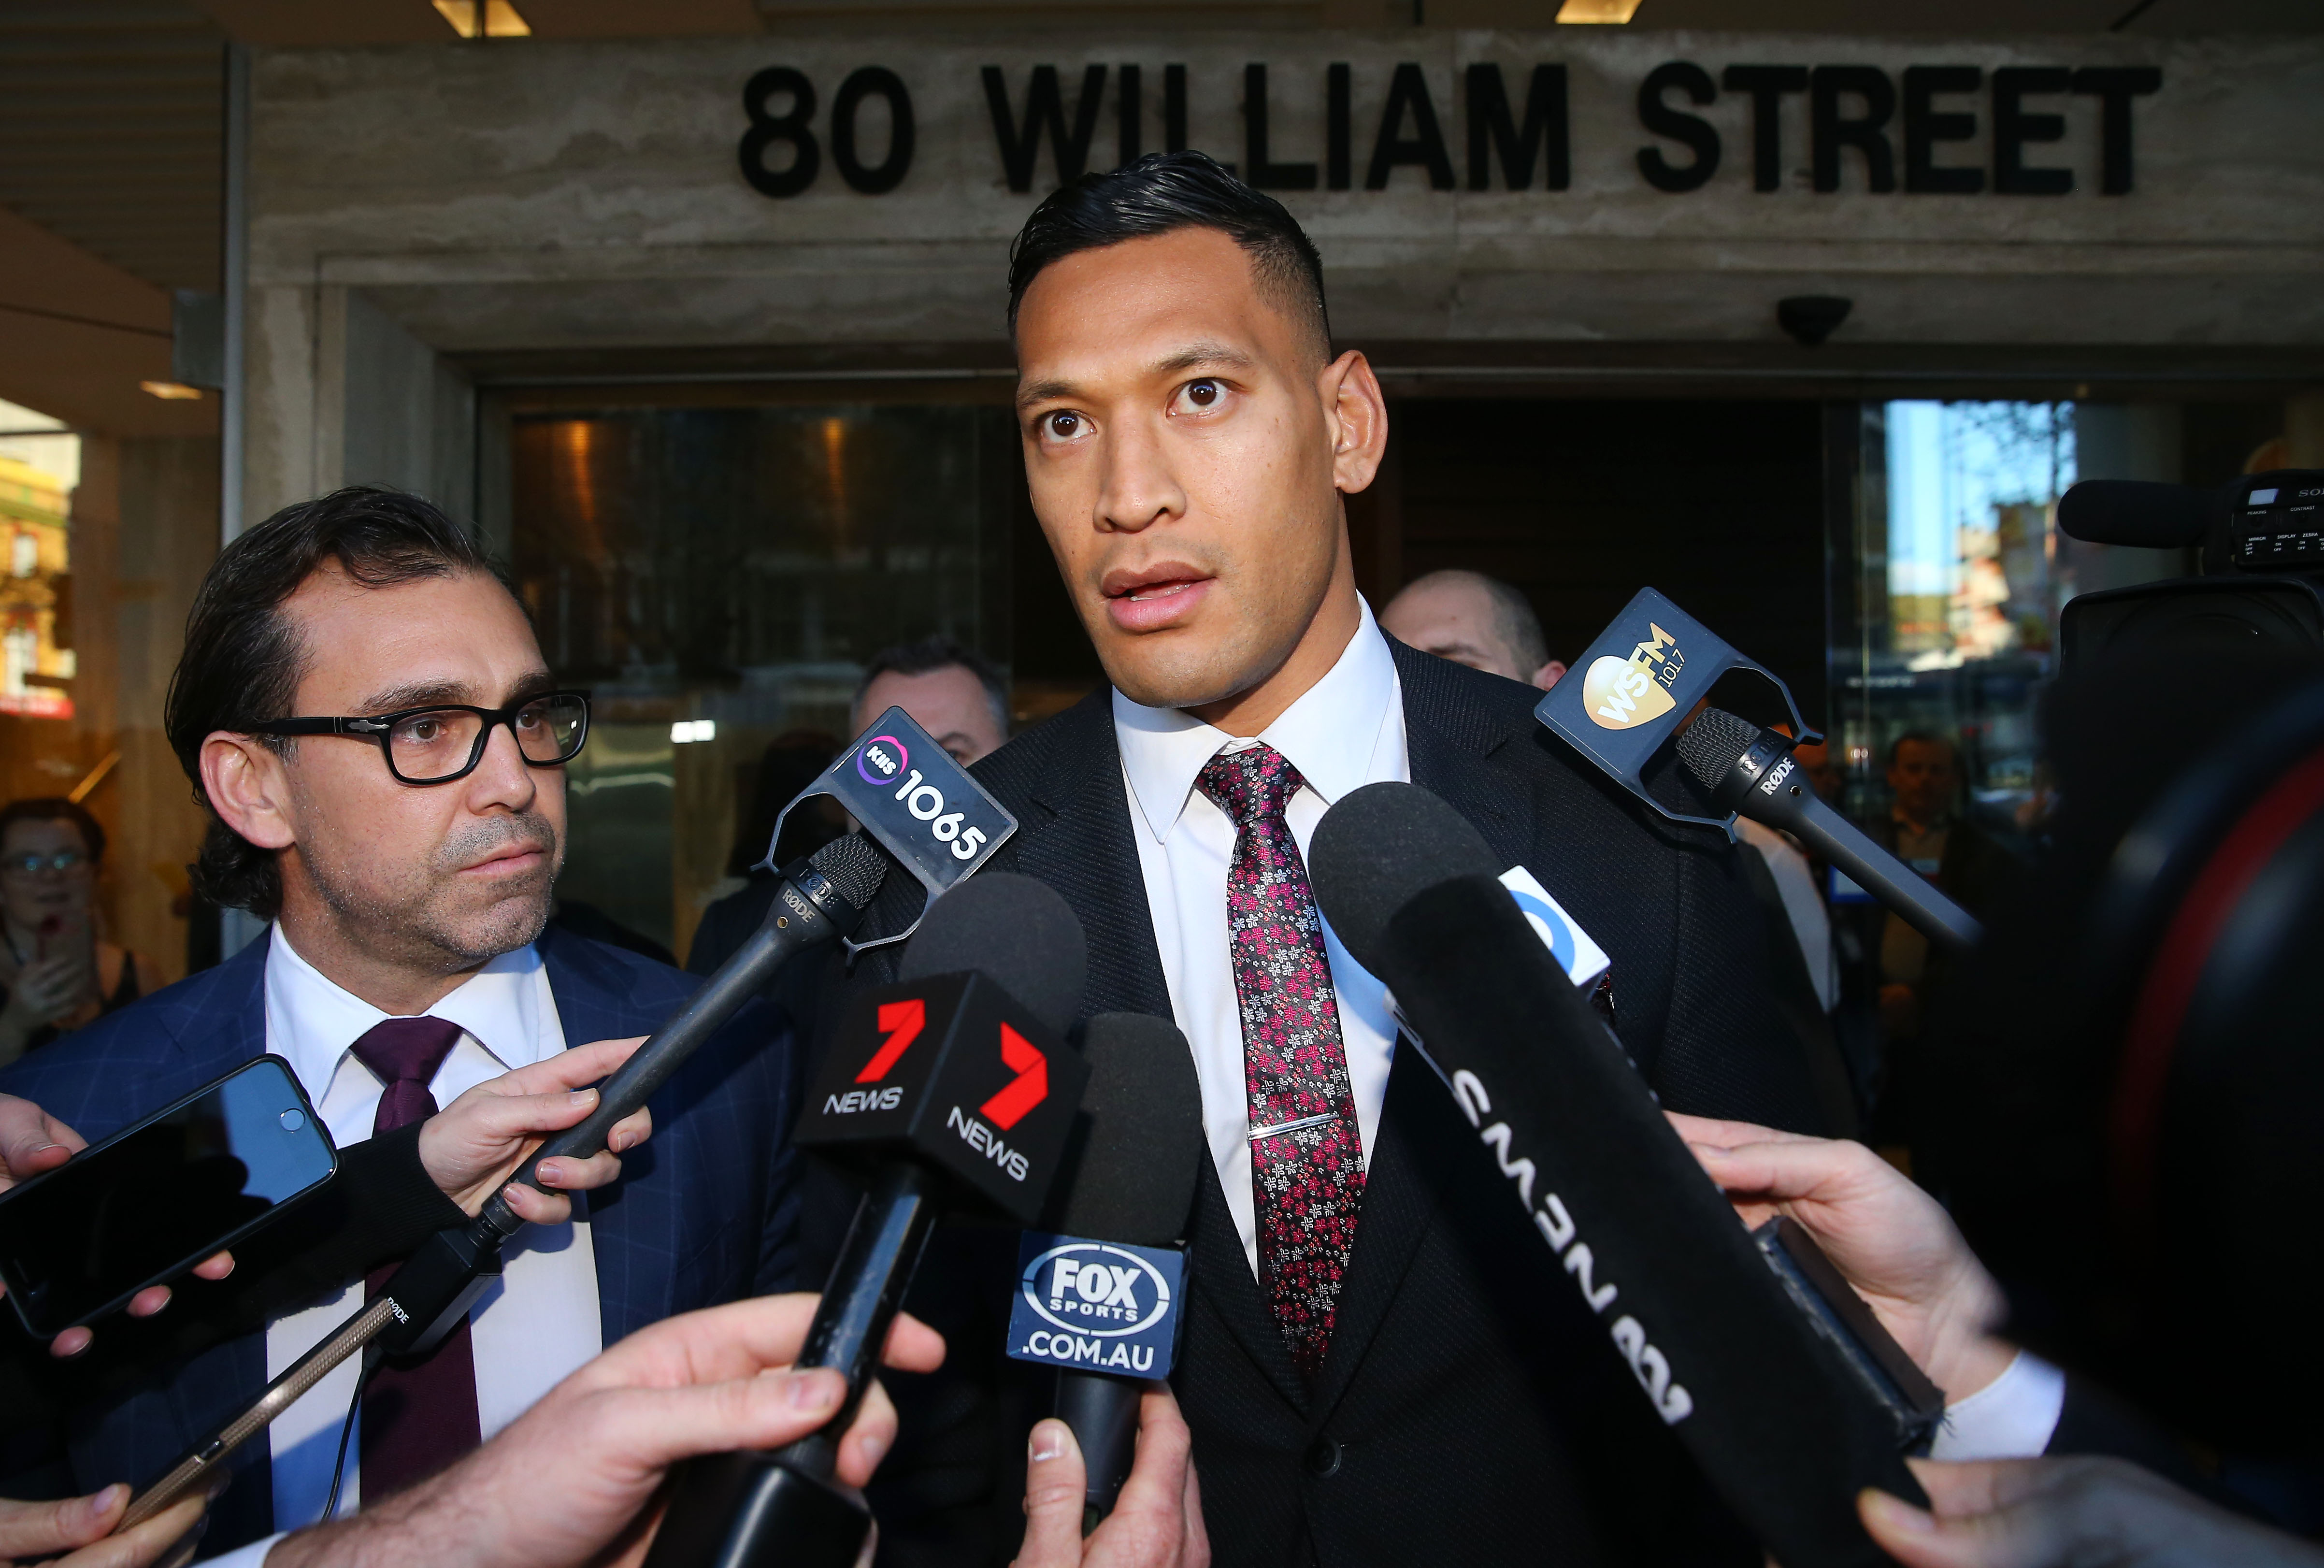 Israel Folau Calls His Sacking “Unenforceable” In New Federal Court Claim